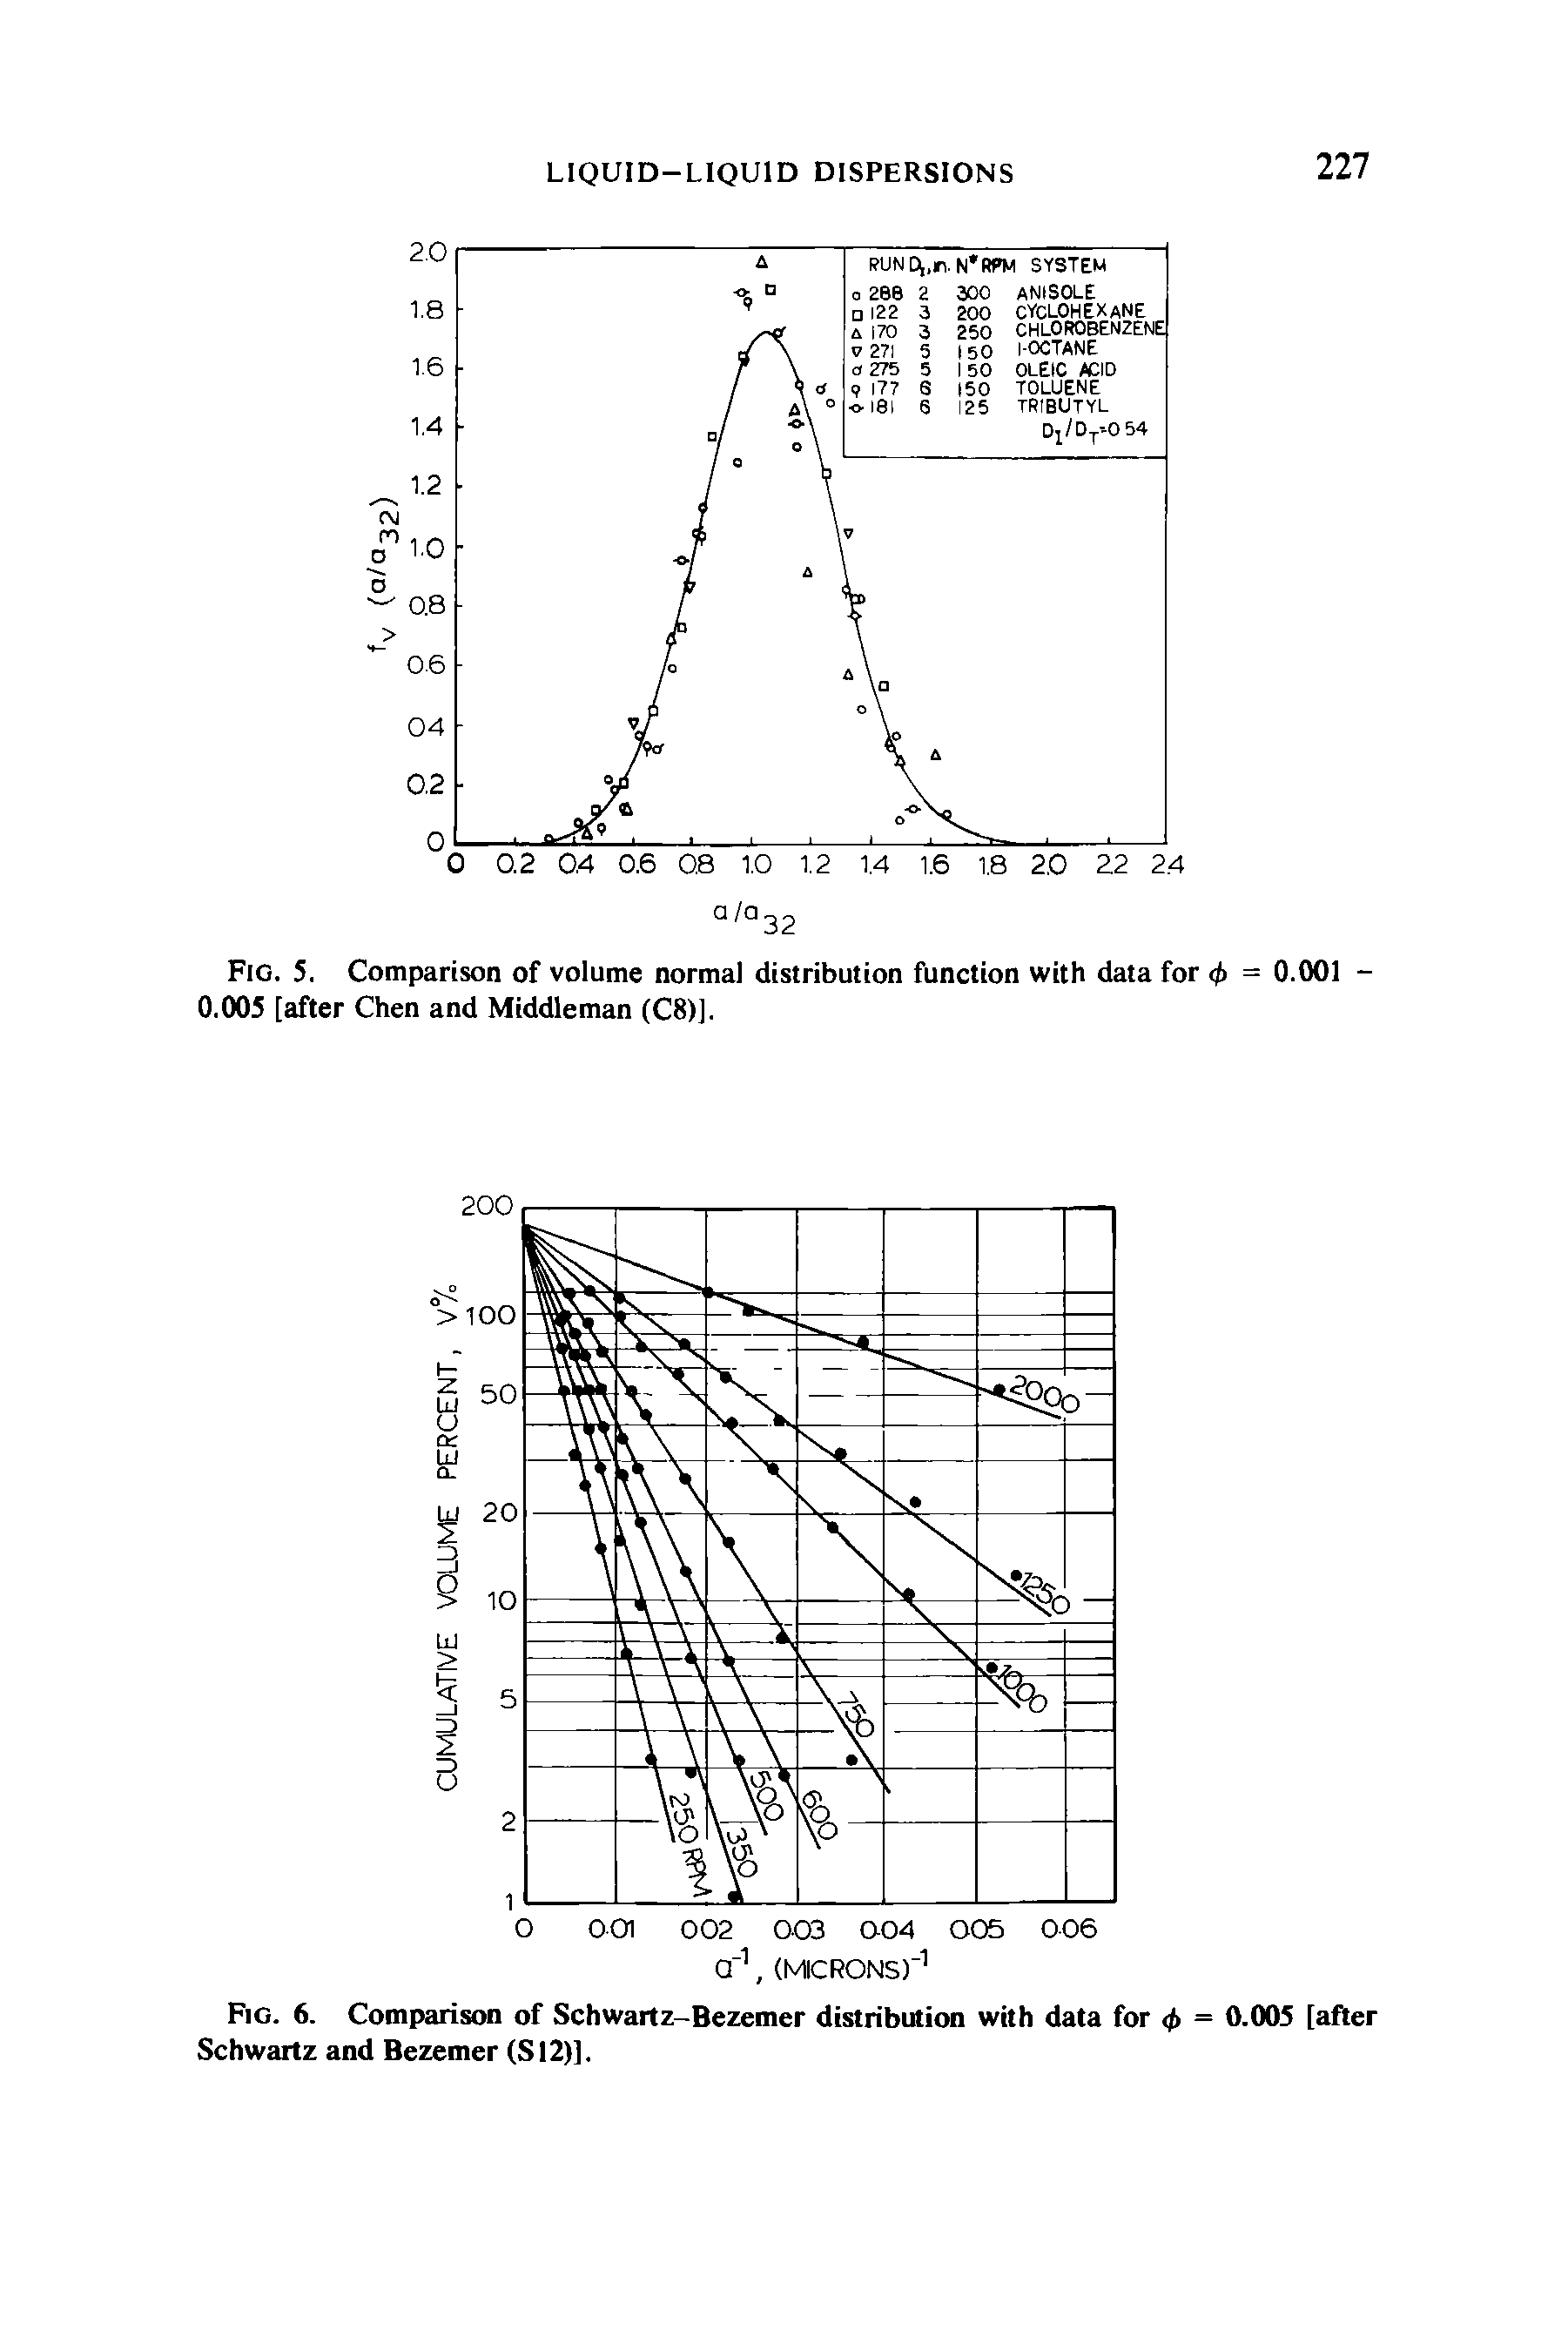 Fig. 5. Comparison of volume normal distribution function with data for <t> = 0.001 0.005 [after Chen and Middleman (C8)].